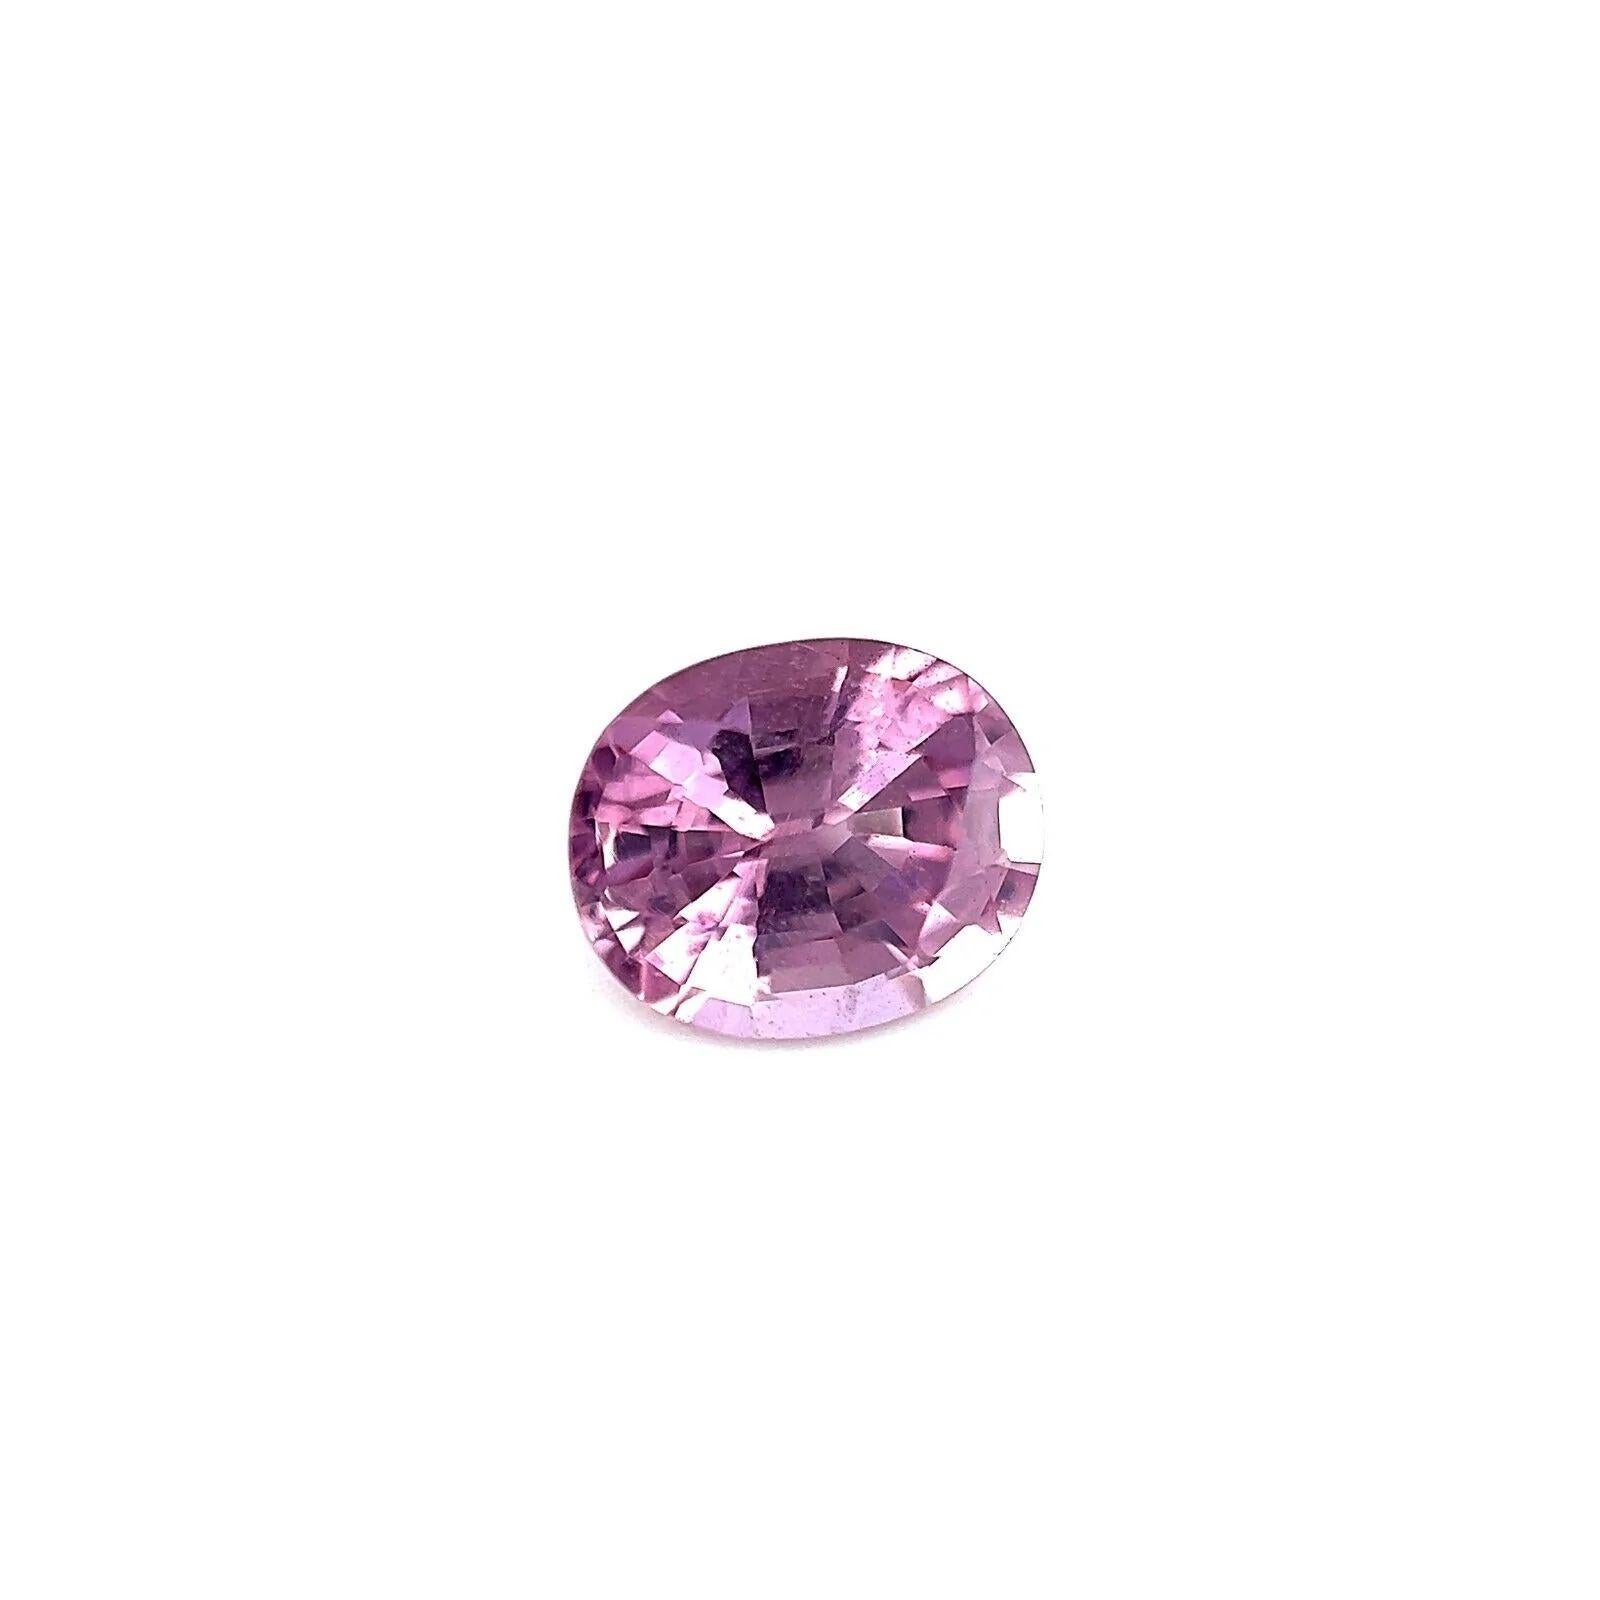 1.15ct Fine Pinkish Purple Spinel Natural Oval Cut 6.8x5.6mm Loose Gemstone

Natural Fine Purple Pink Spinel Gemstone.
1.15 Carat spinel with a vivid purple pink colour and very good clarity.
Very clean stone, also has an excellent oval